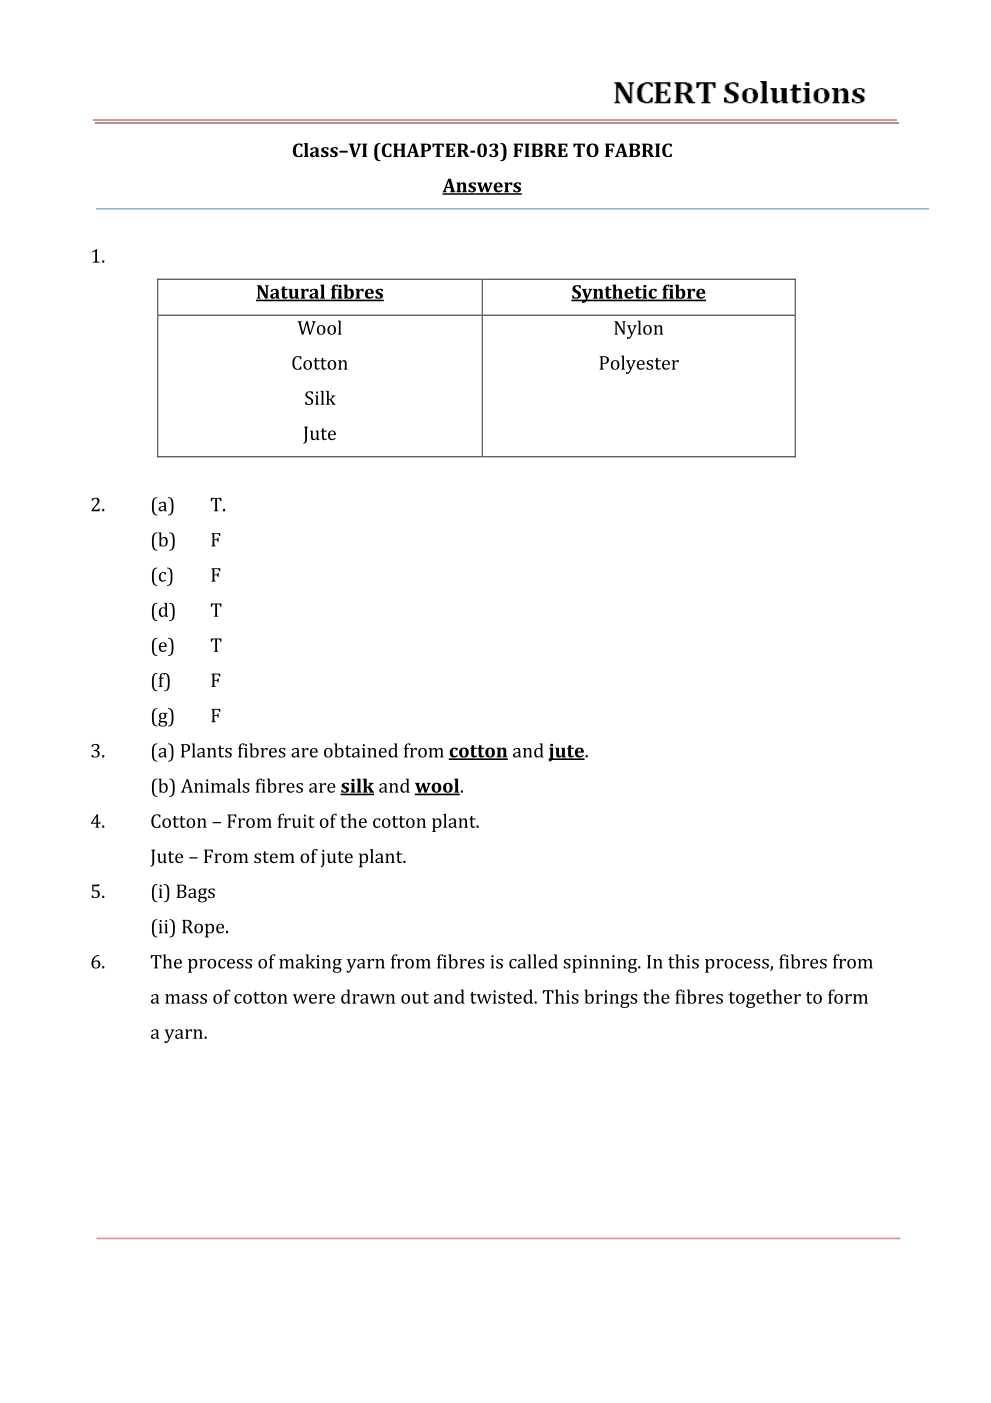 NCERT Solutions For Class 6 Science Chapter 3